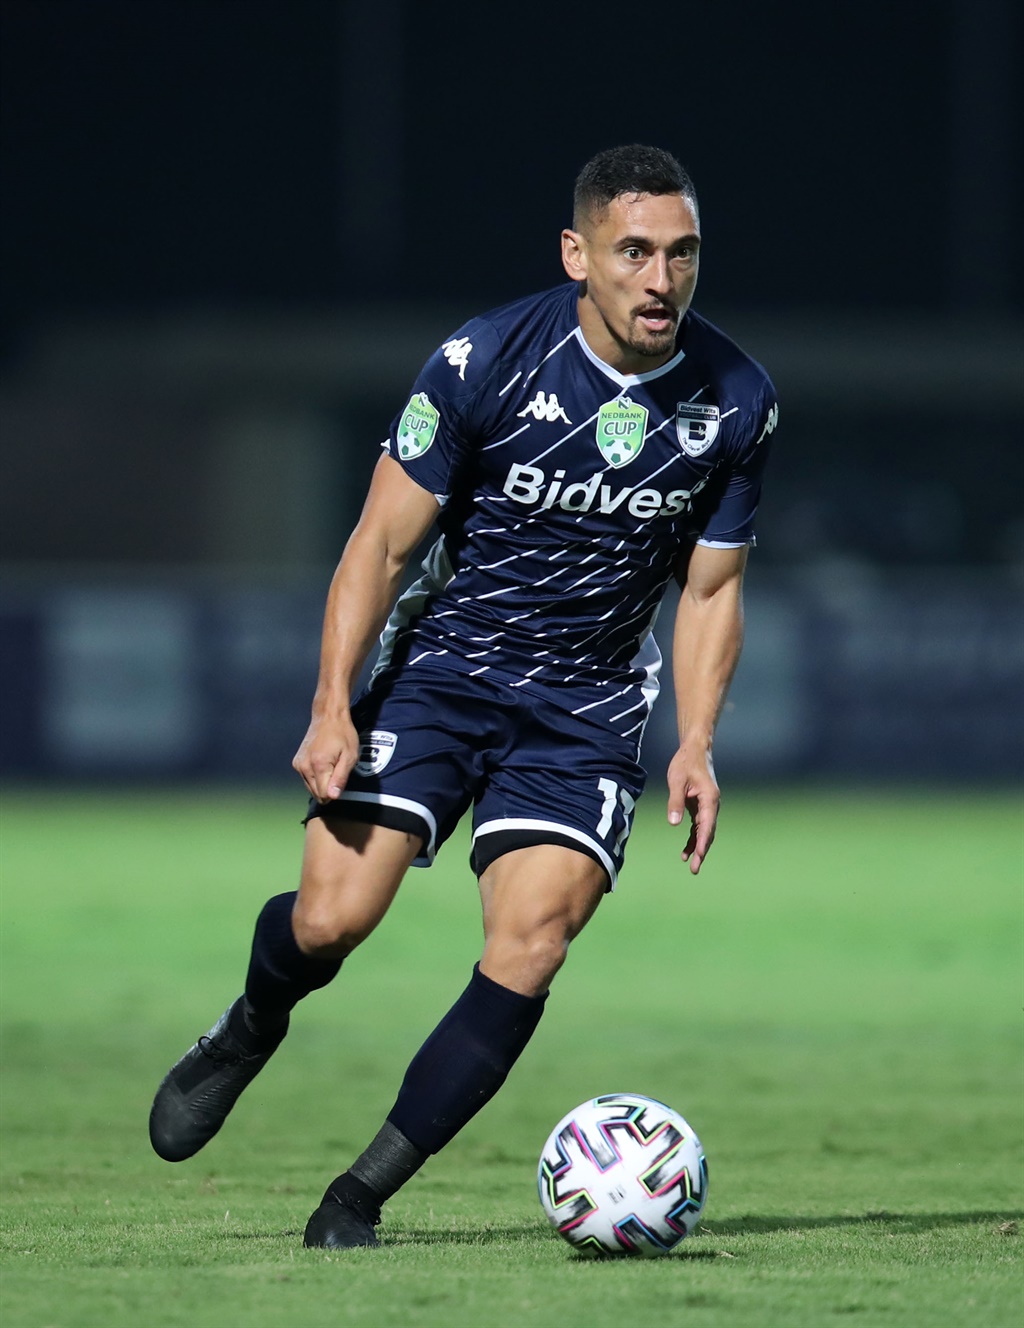 Cole Alexander of Bidvest Wits during the 2020 Nedbank Cup Quarterfinal match between Real Kings and Bidvest Wits at the Sugar Ray Xulu Stadium, Clermont on the 13 March 2020 Â©Muzi Ntombela/BackpagePix